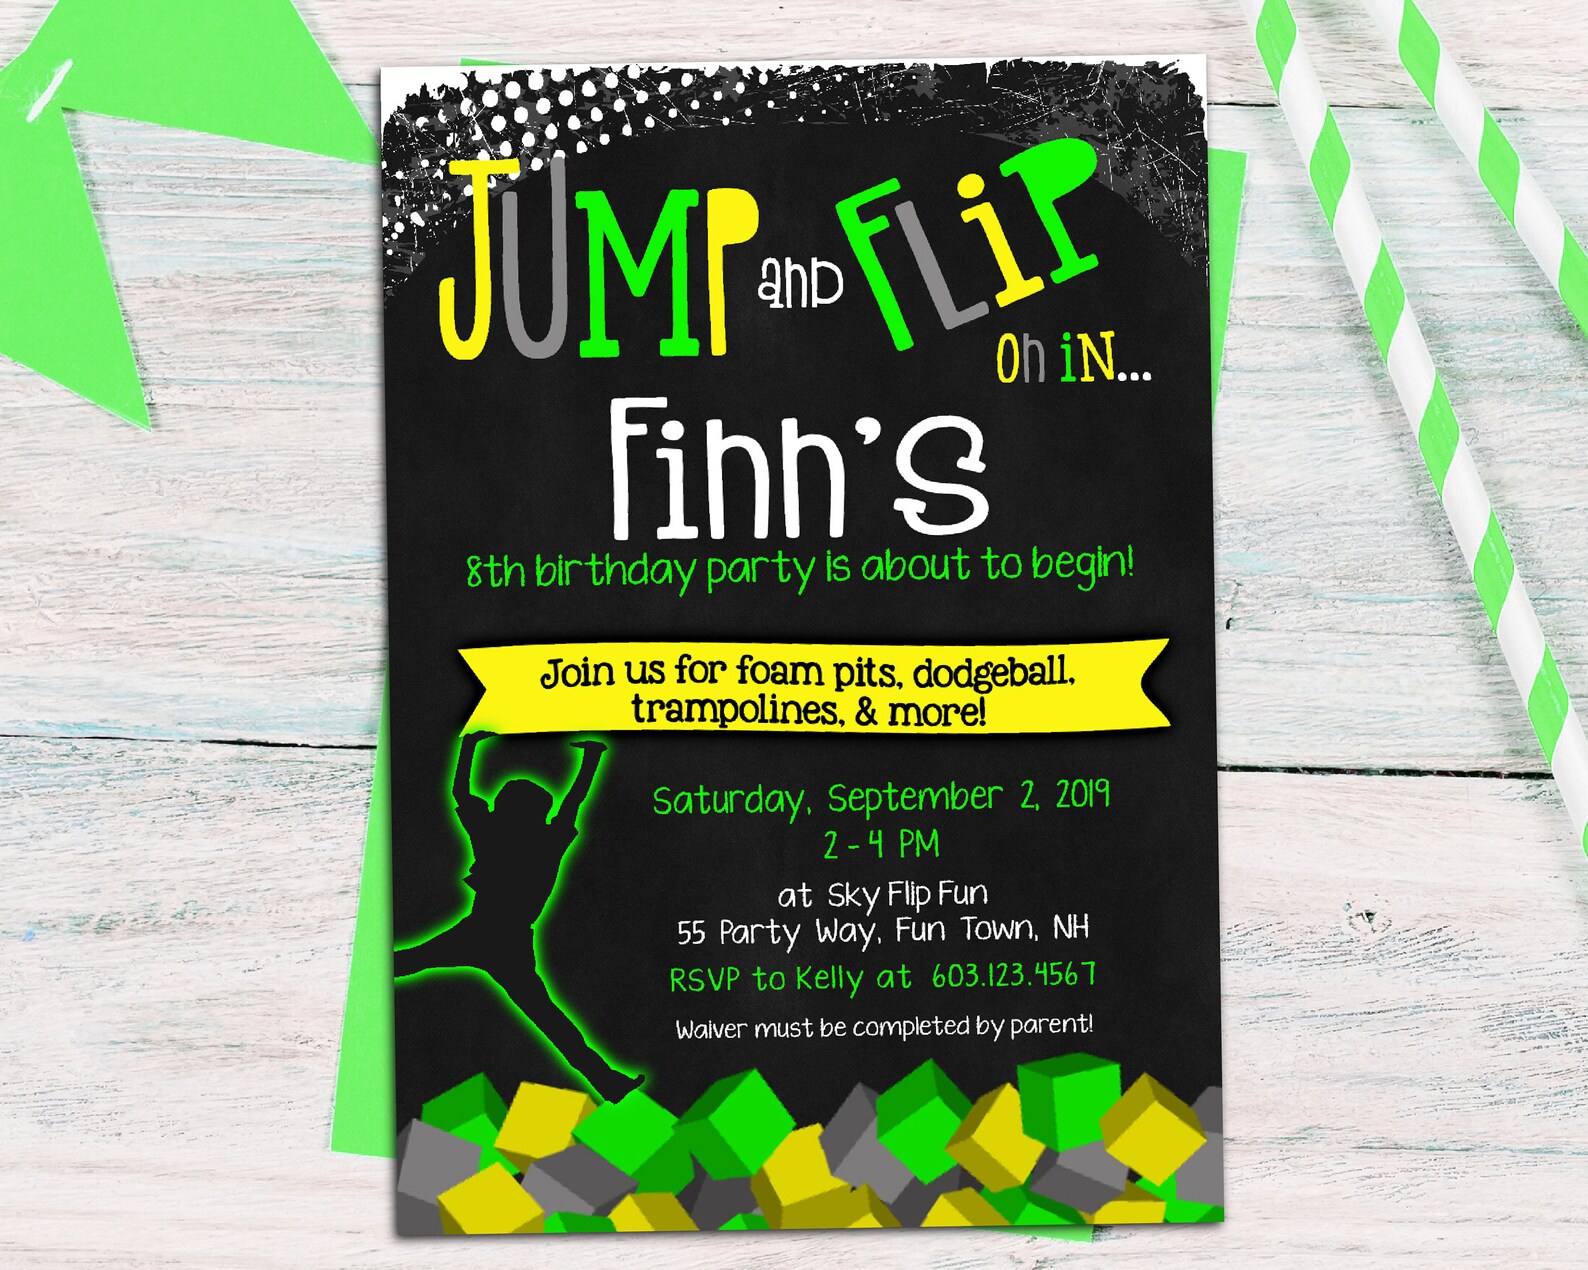 foam-pit-birthday-party-invitation-jumping-party-for-a-boy-or-etsy